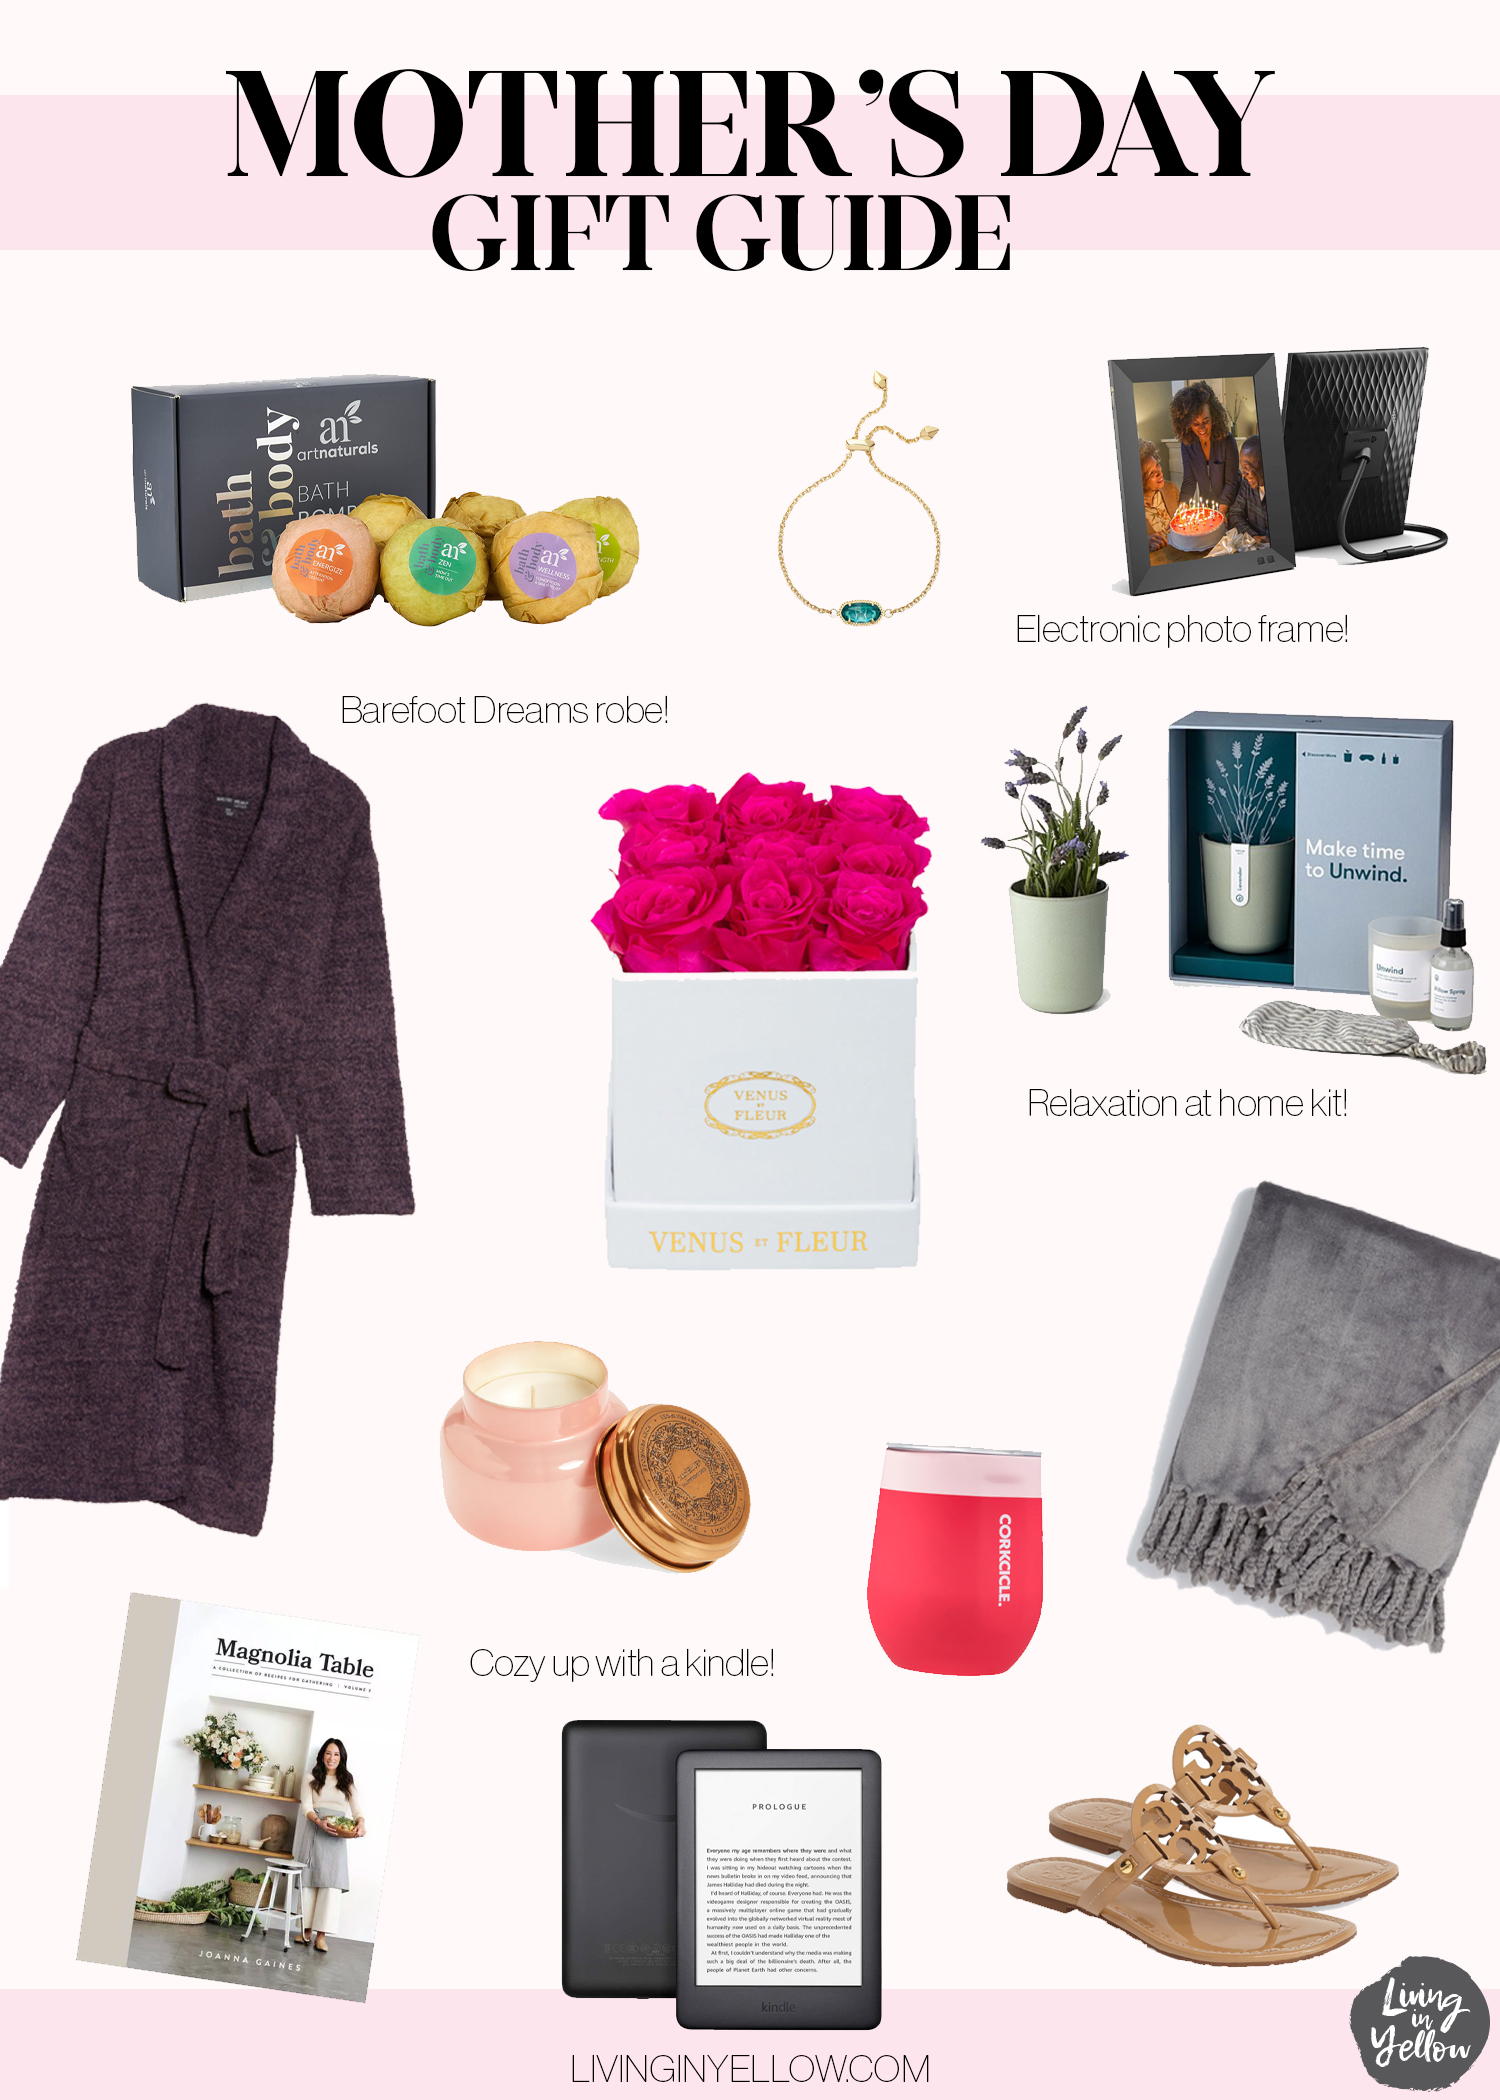 Mother's Day Gift Guide: Unique Gifts that Mom Will Love - hello emily erin